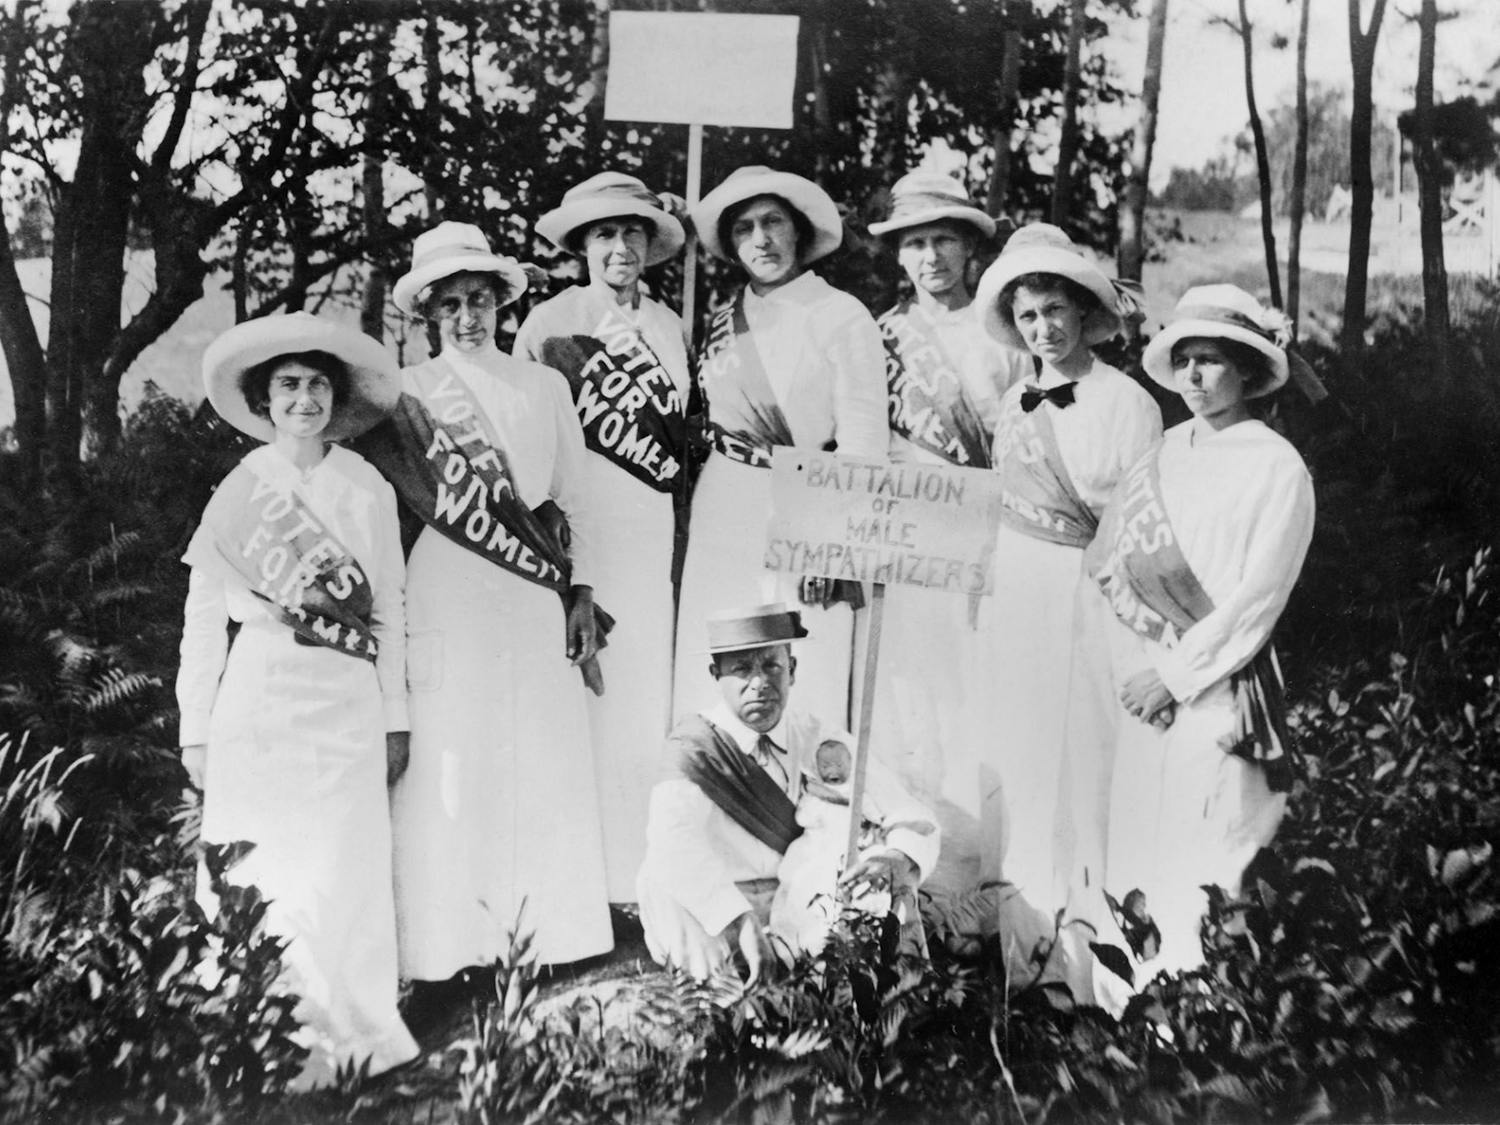 Pictured about is a group of North Carolina suffragists from 1916-1920. Gertrude Weil, president of the North Carolina Equal Suffrage Association, is on the far left. Photo courtesy of State Archives of North Carolina.